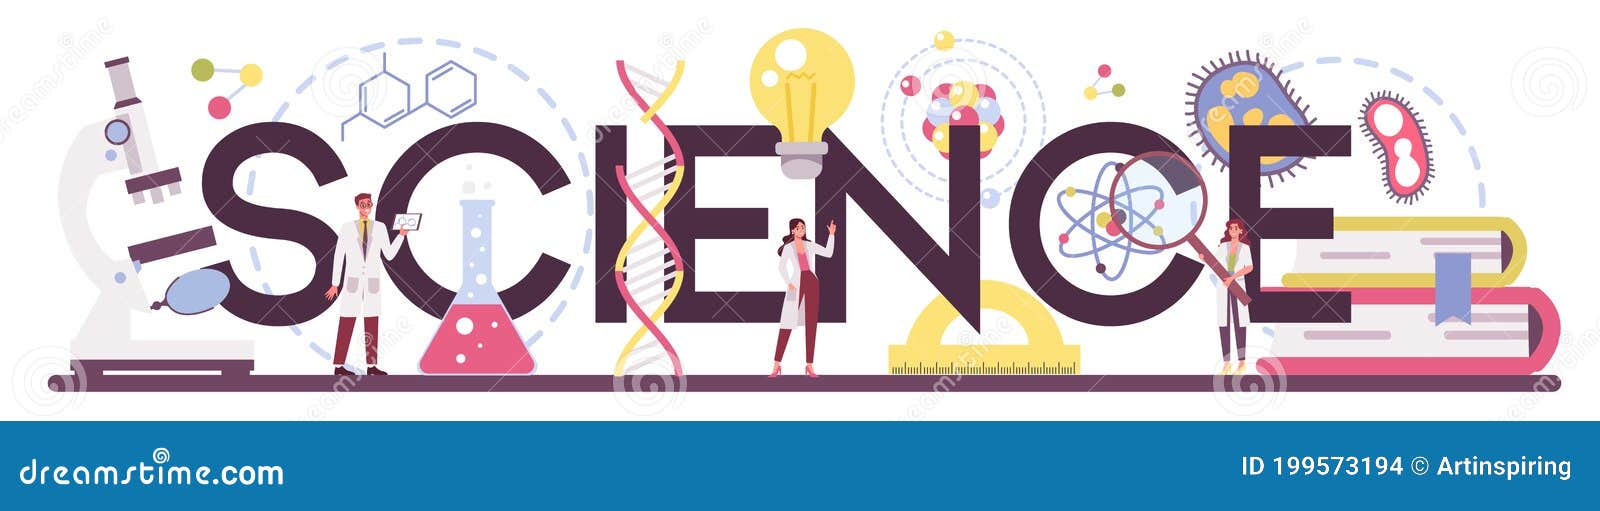 science typographic header. idea of education and innovation.